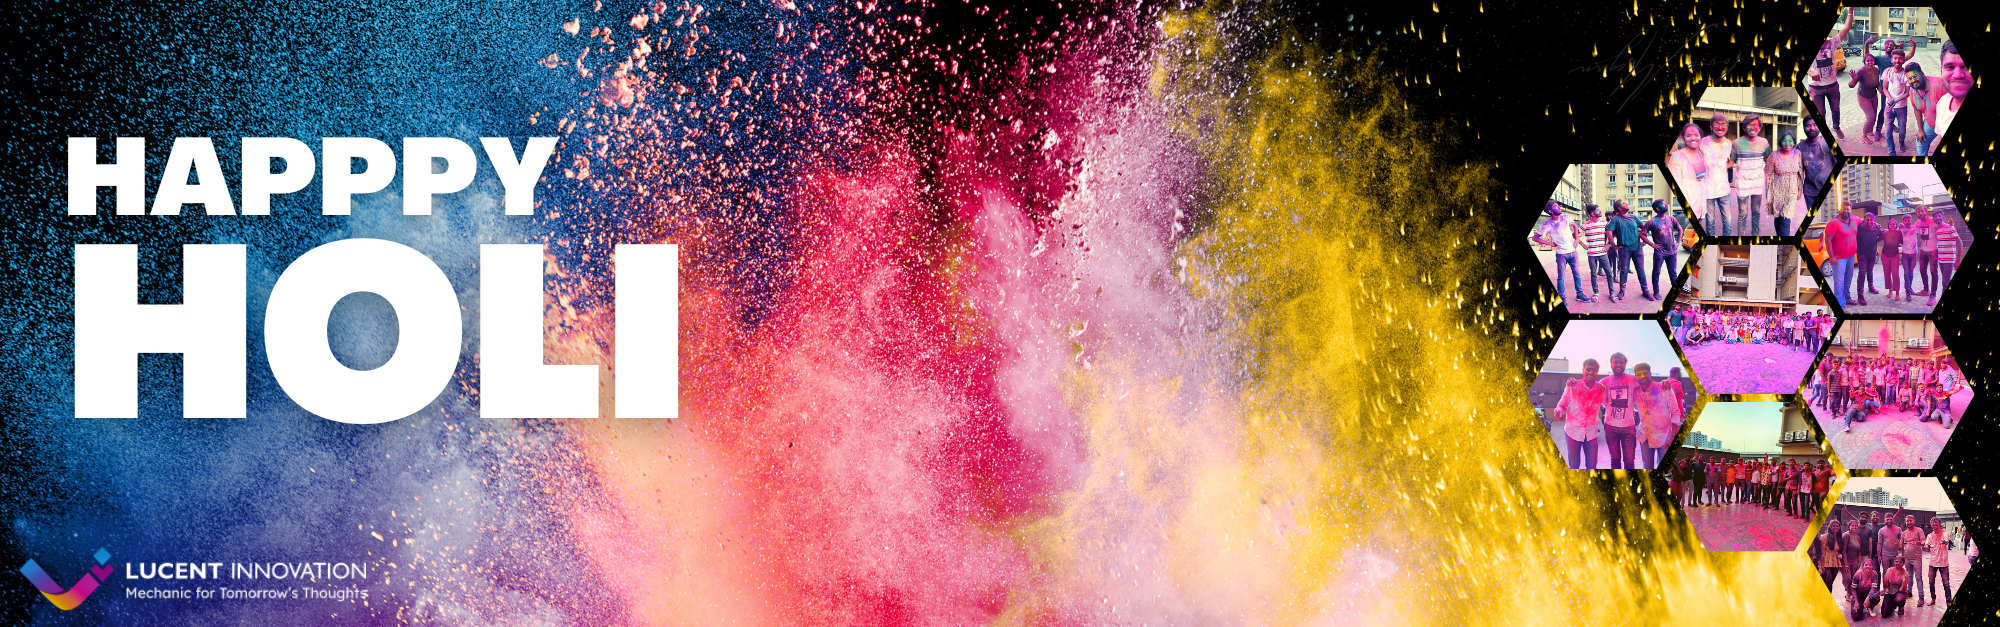 Colors, Music, and Memories: The Ultimate Holi Celebration at the Office